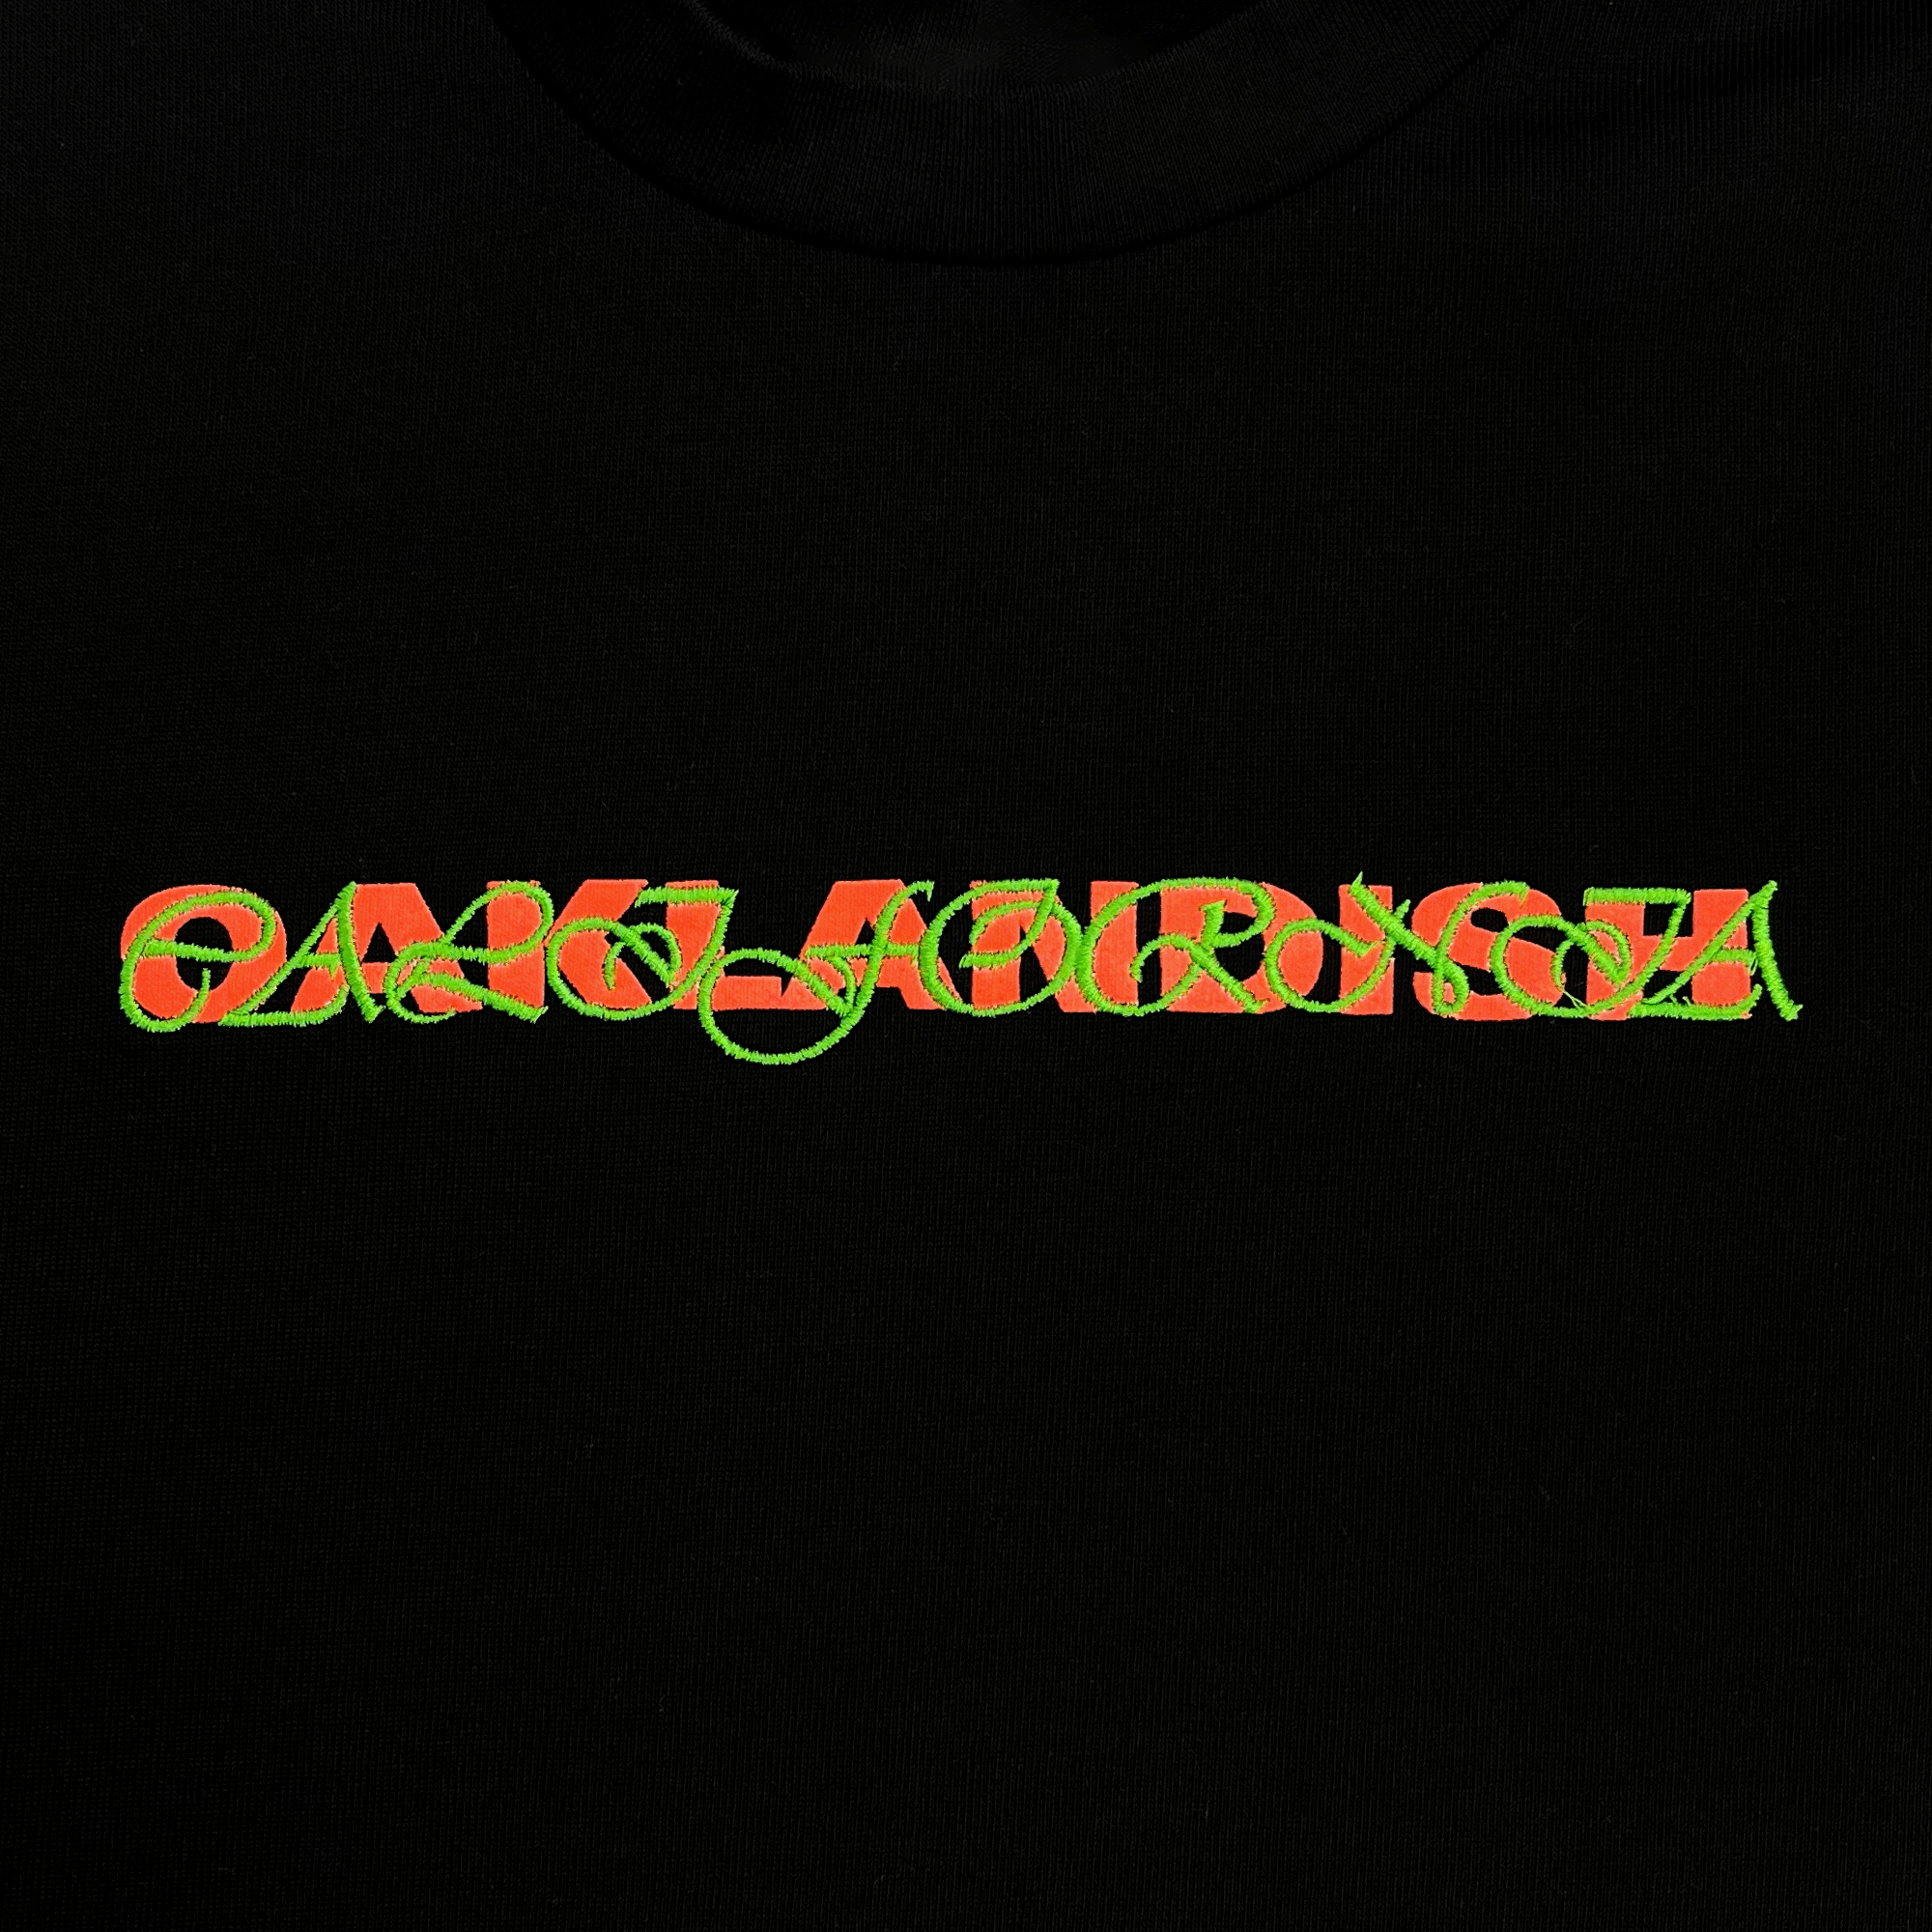 Close-up on Oaklandish wordmark with green scripted Oaklandish wordmark on top on a black t-shirt.